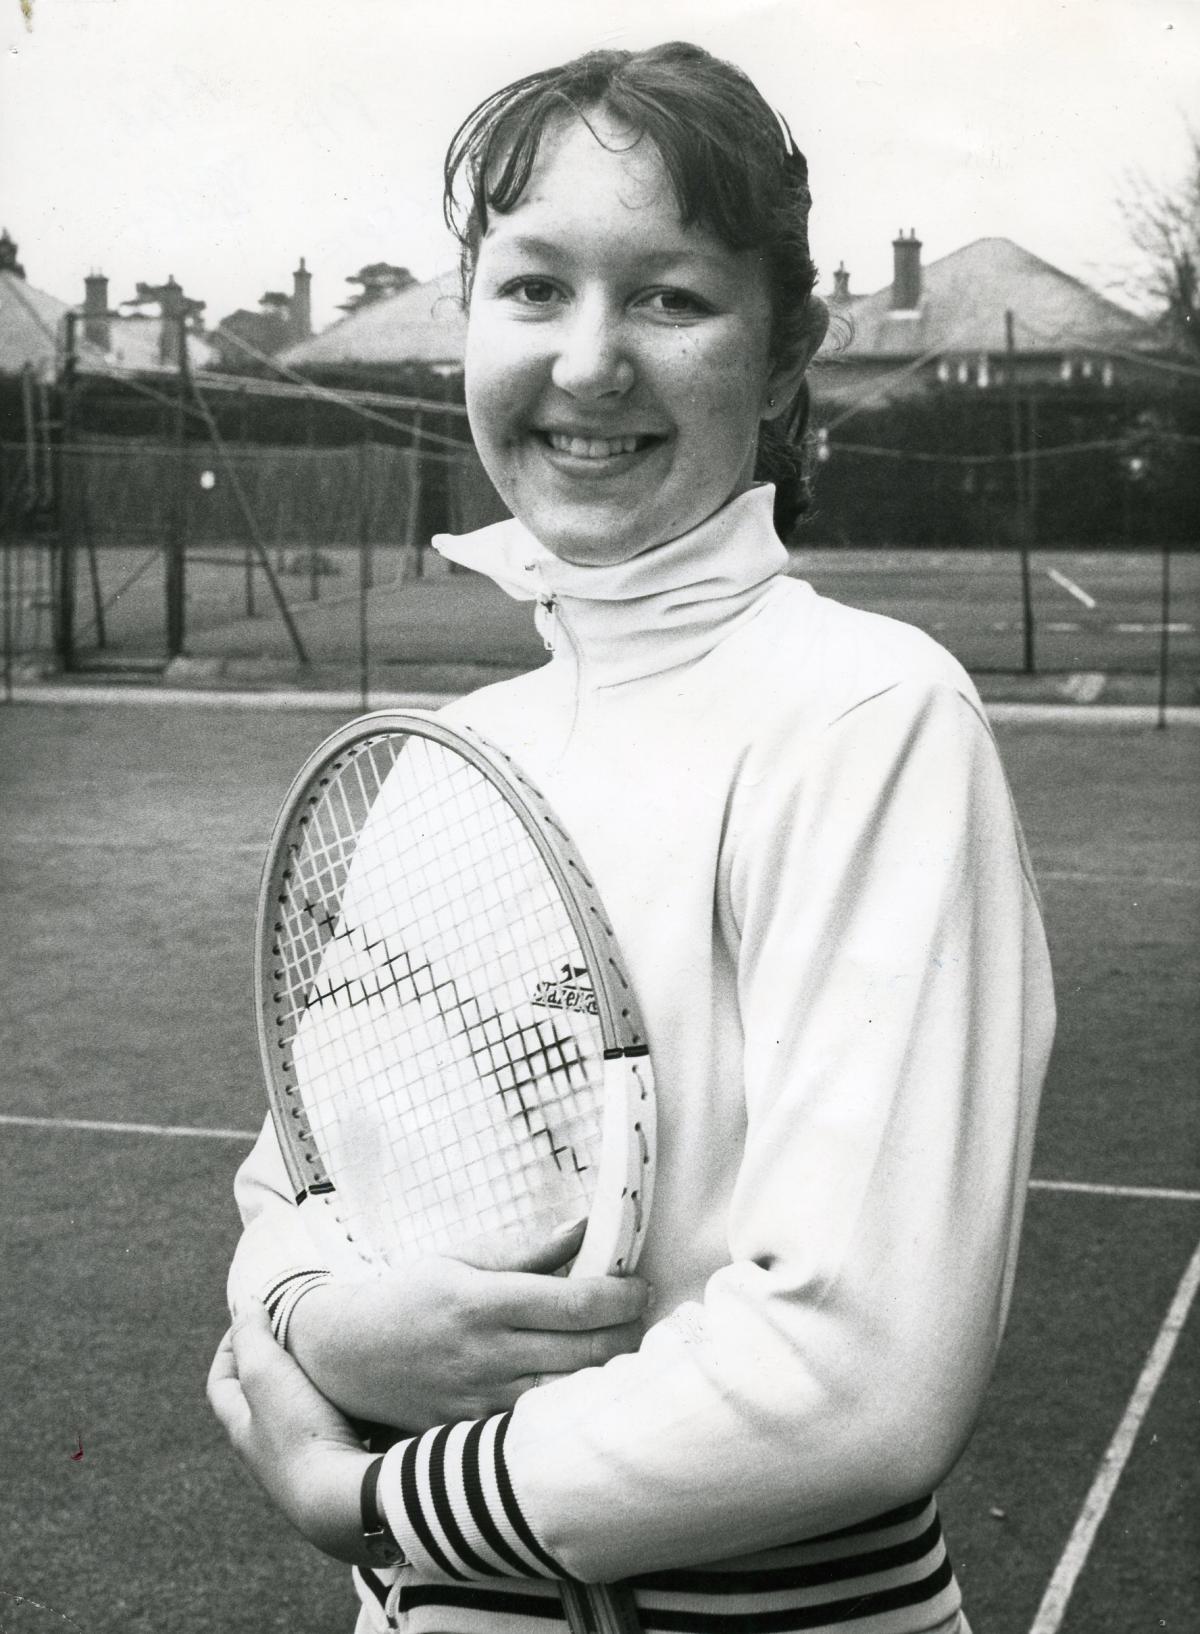 Pictures of tennis players in the 1970s | Daily Echo